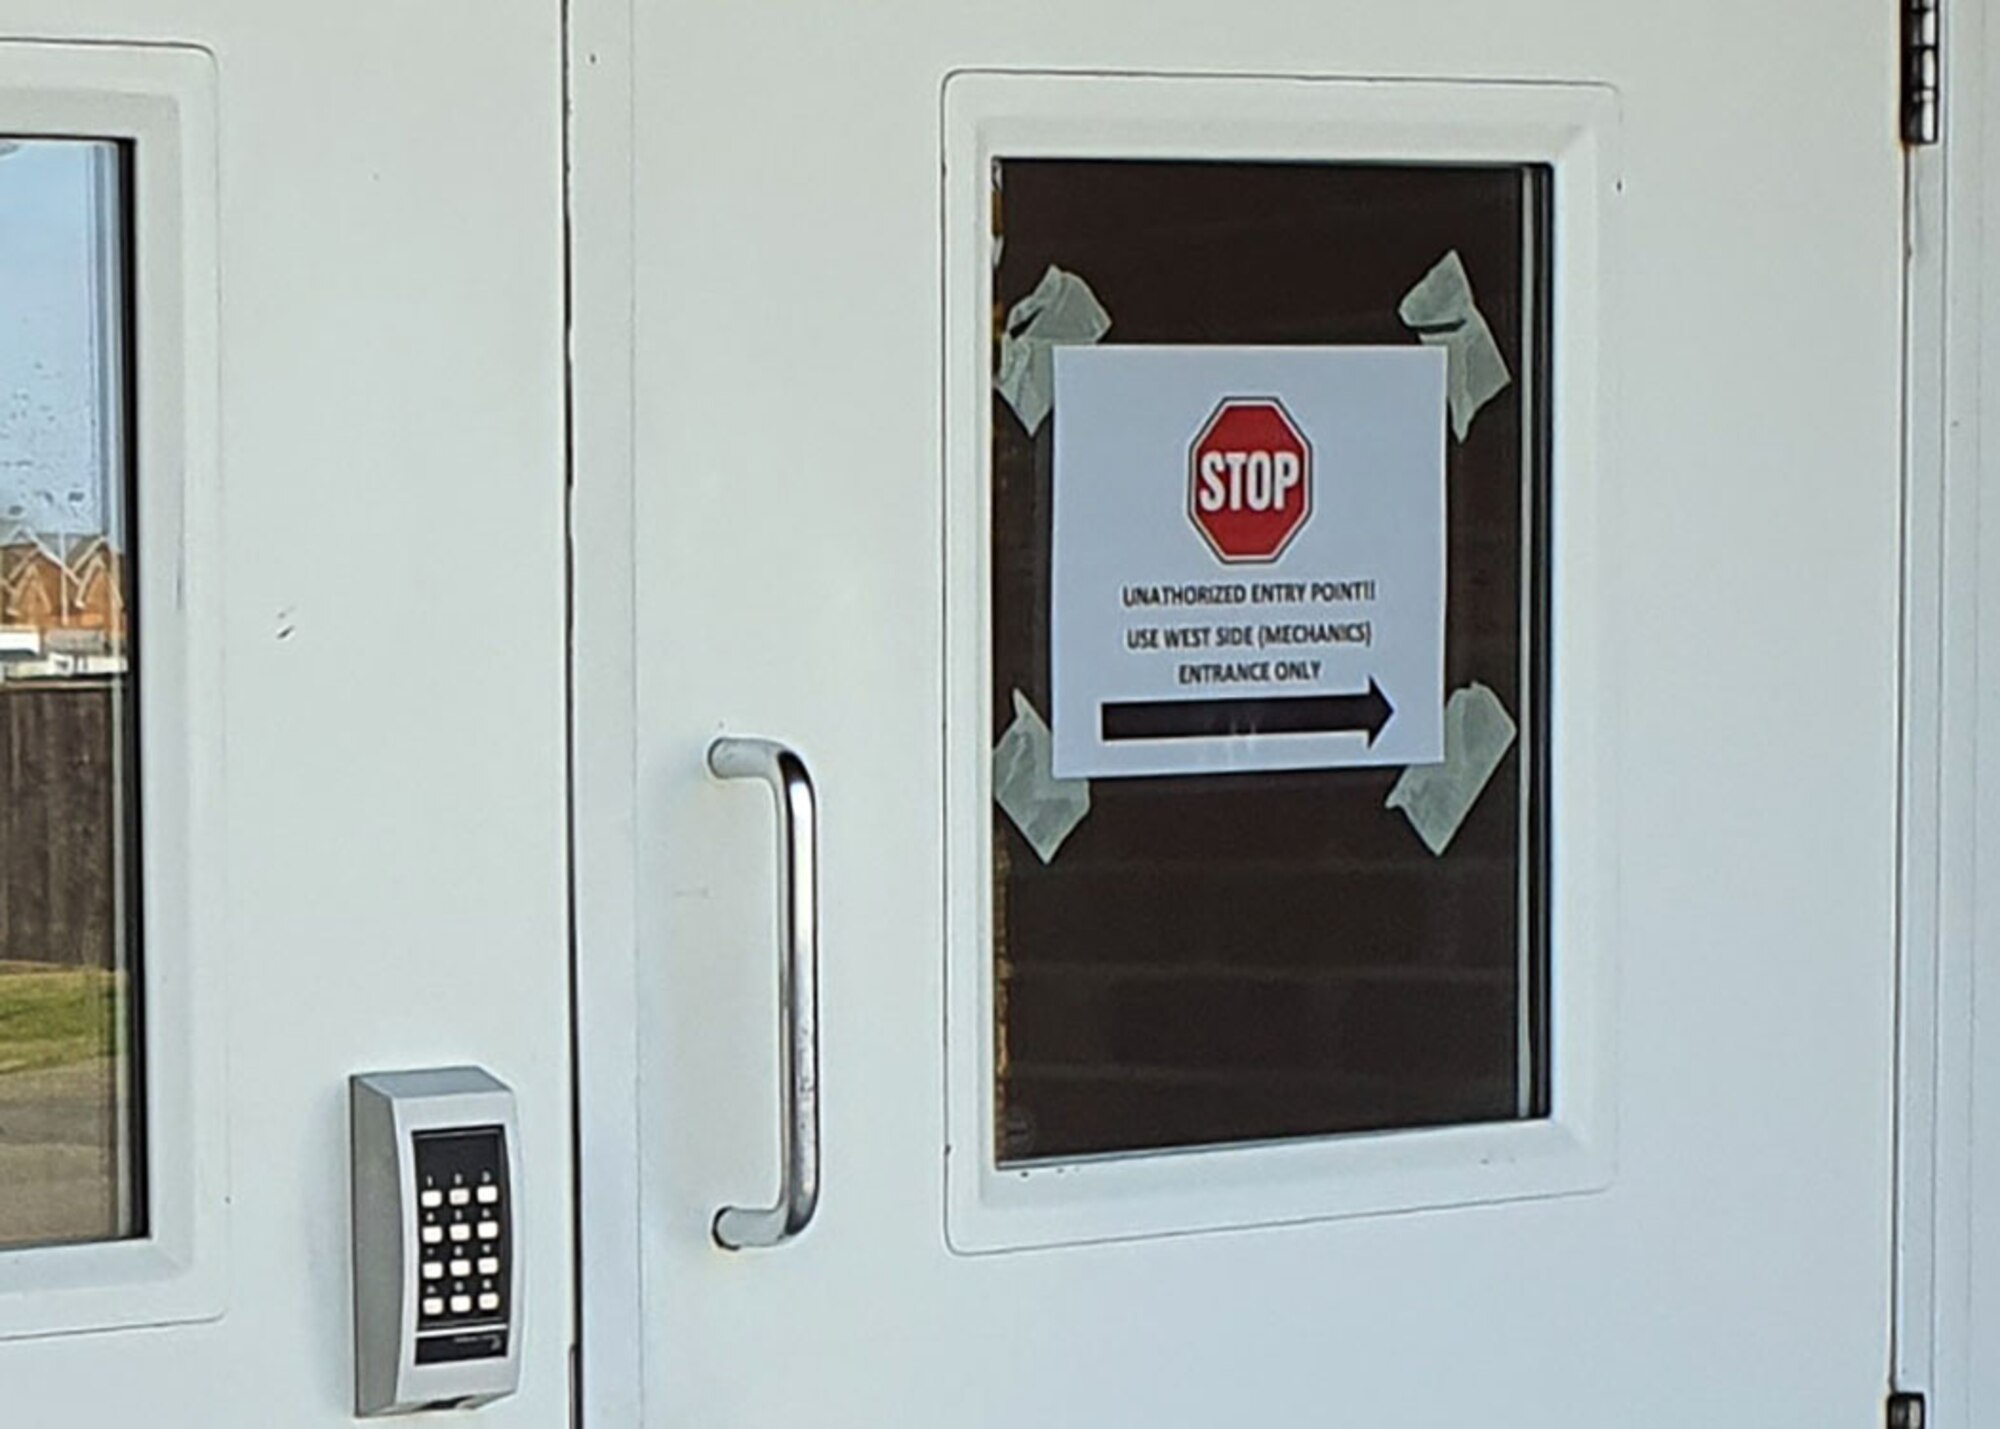 A sign on the front door of the 100th Civil Engineer Squadron Fire Department shows current restrictions and single point of entry as part of the extra precautions being taken by the fire department April 7, 2020, at RAF Mildenhall, England. During the COVID-19 lockdown, the fire department's leadership is regularly adjusting policy and providing firefighters crucial updates to ensure the health and safety of the fire station. (Courtesy photo by Matthew Thorpe)